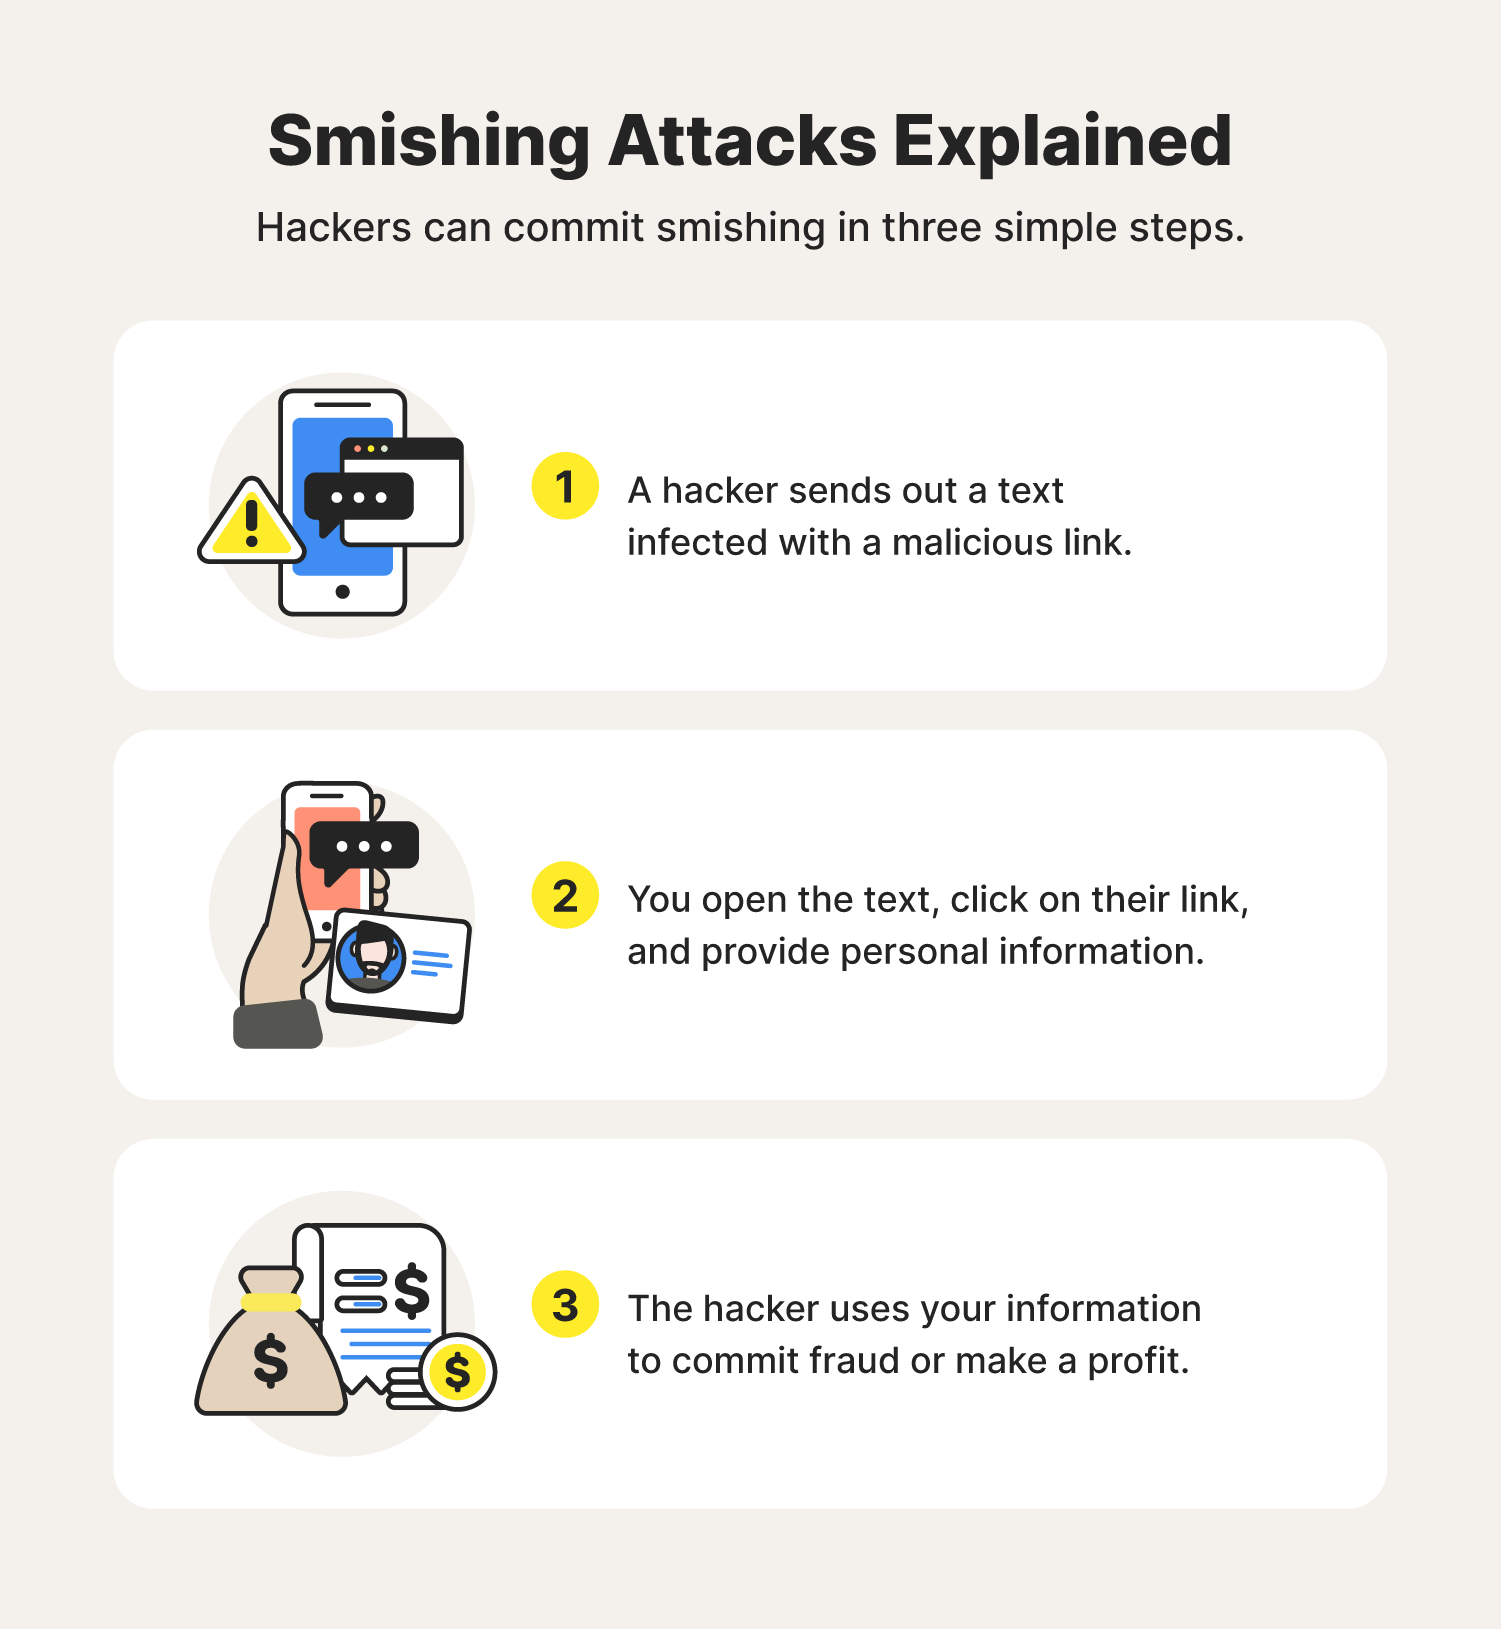 Three illustrations accompany the steps of a smishing attack.